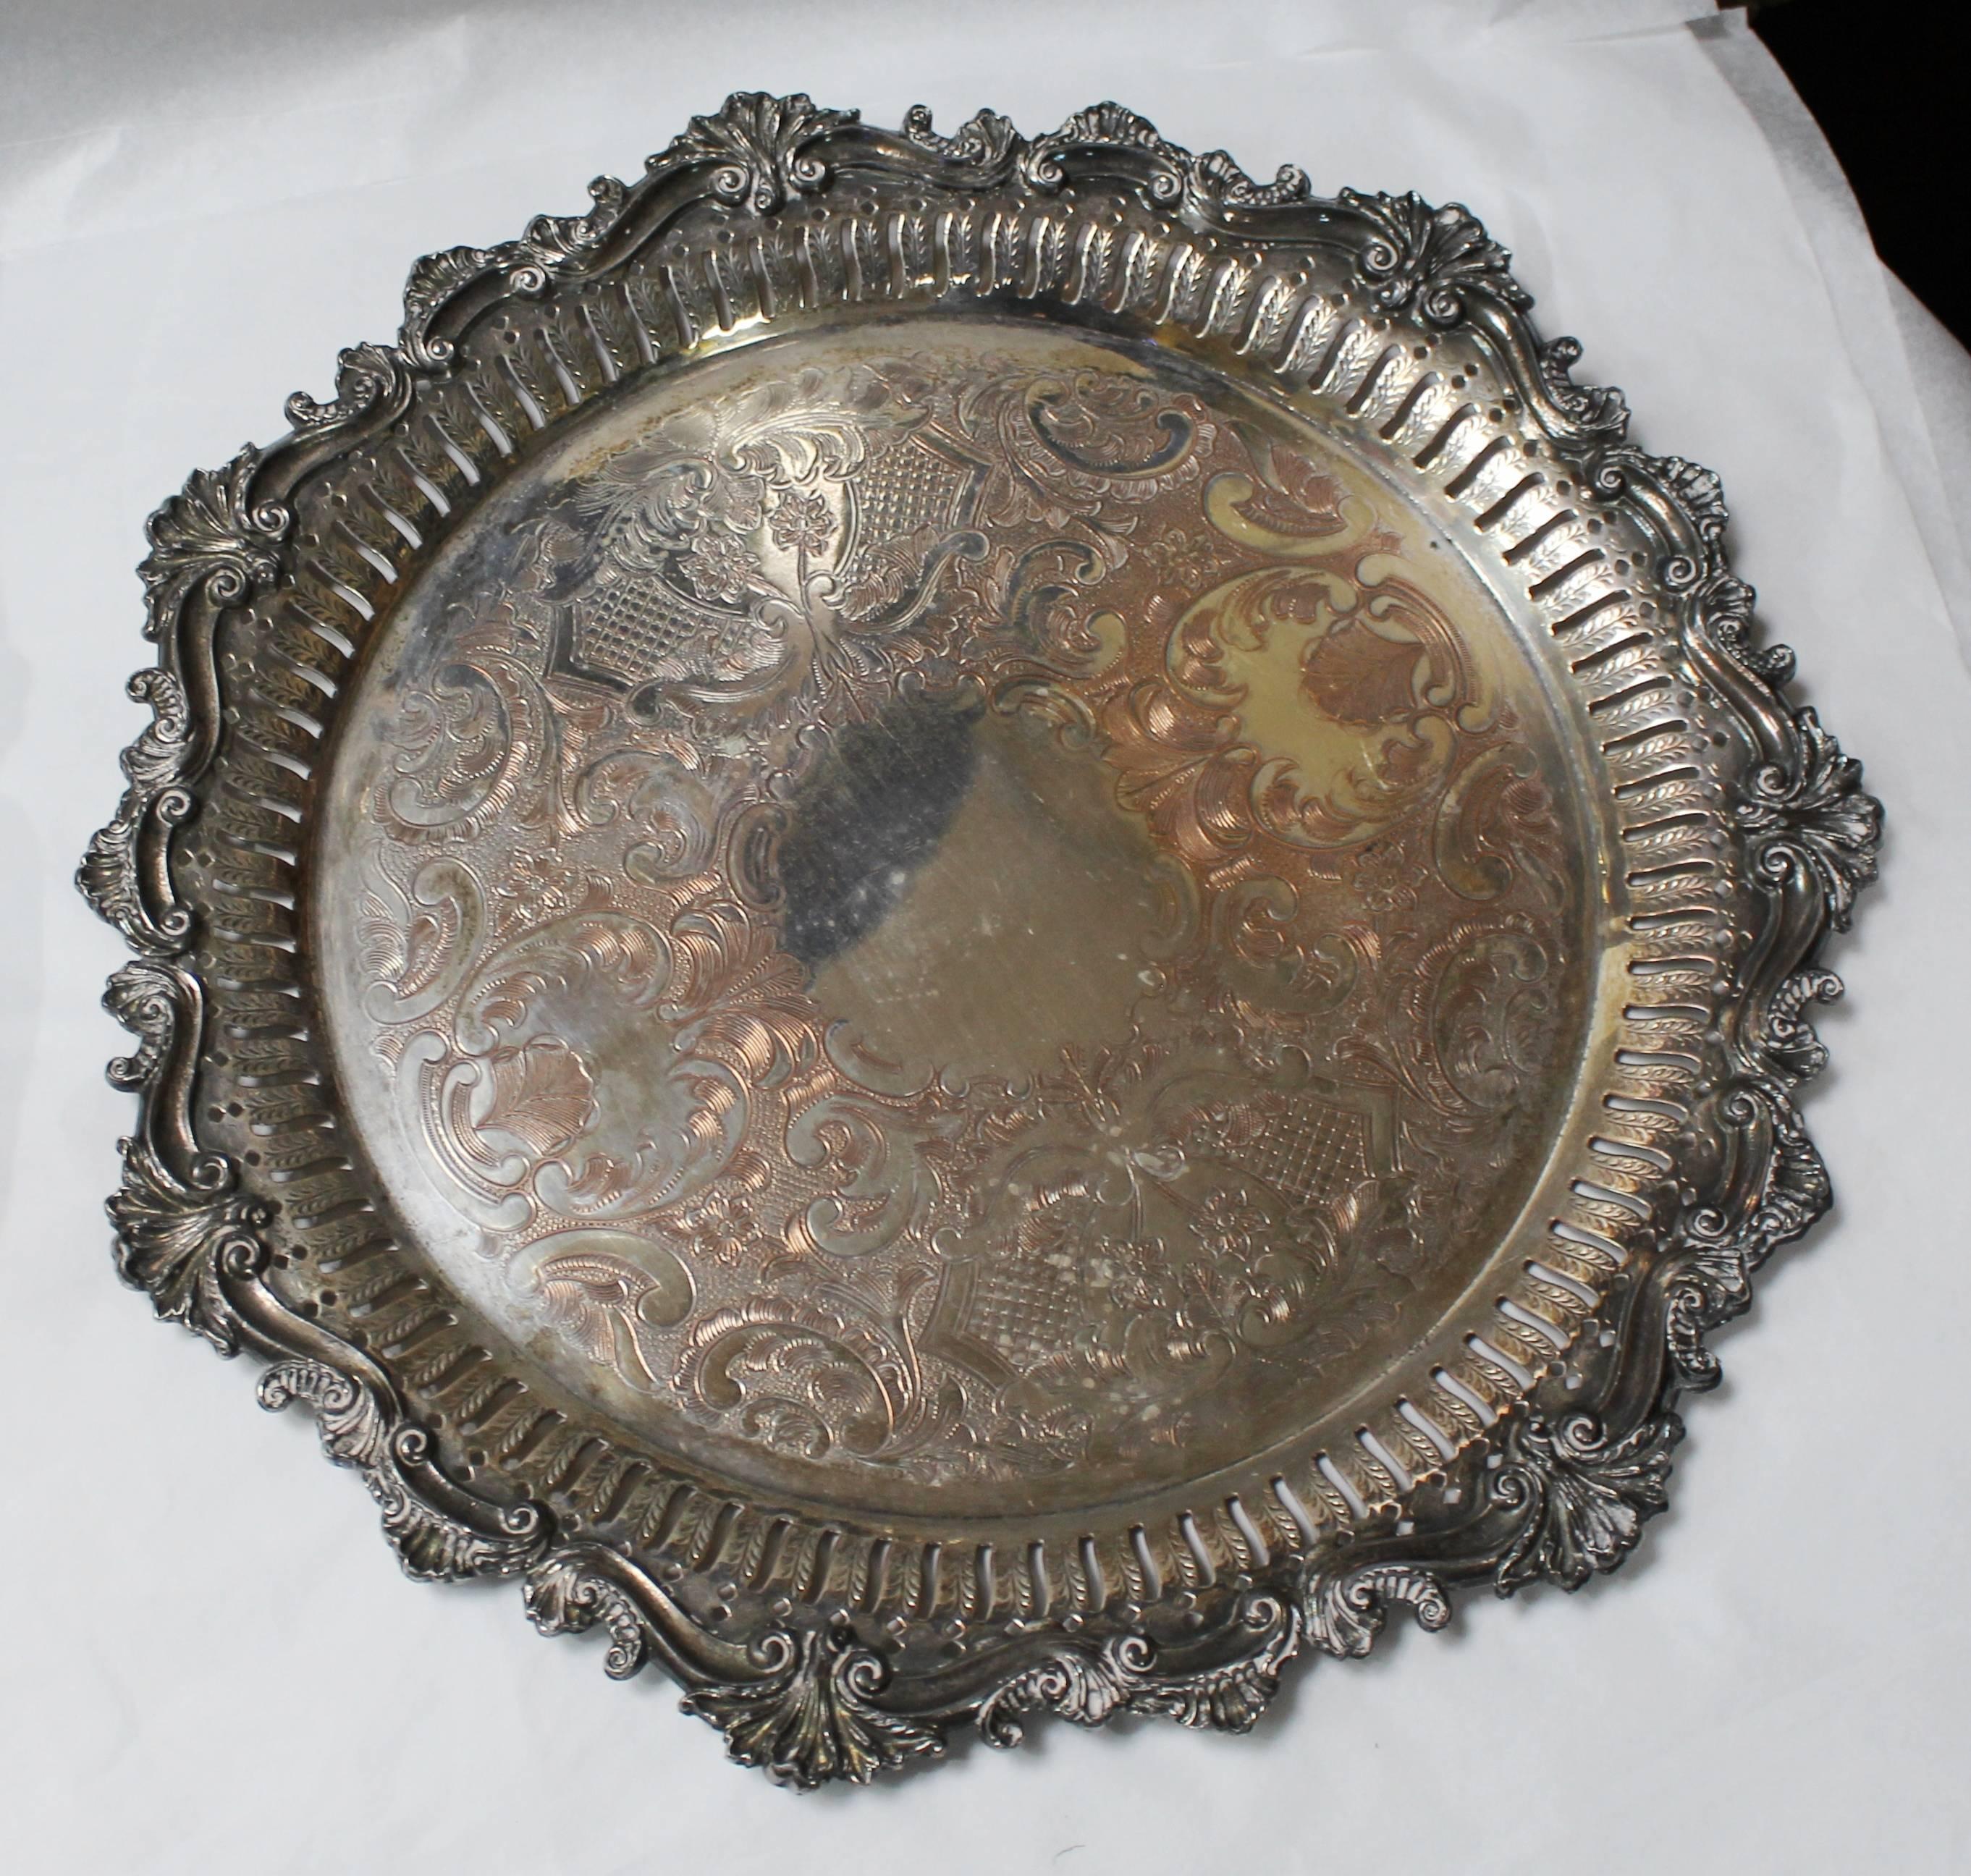 Tray
Composition silver on copper
Measures: Diameter 37.5 cm / 14 3/4 in
Height 2 cm / 3/4 in
Mark stamped to the back E.P.Copper
Condition good condition commensurate with age. Wear to the silver plate (where the copper underneath can be